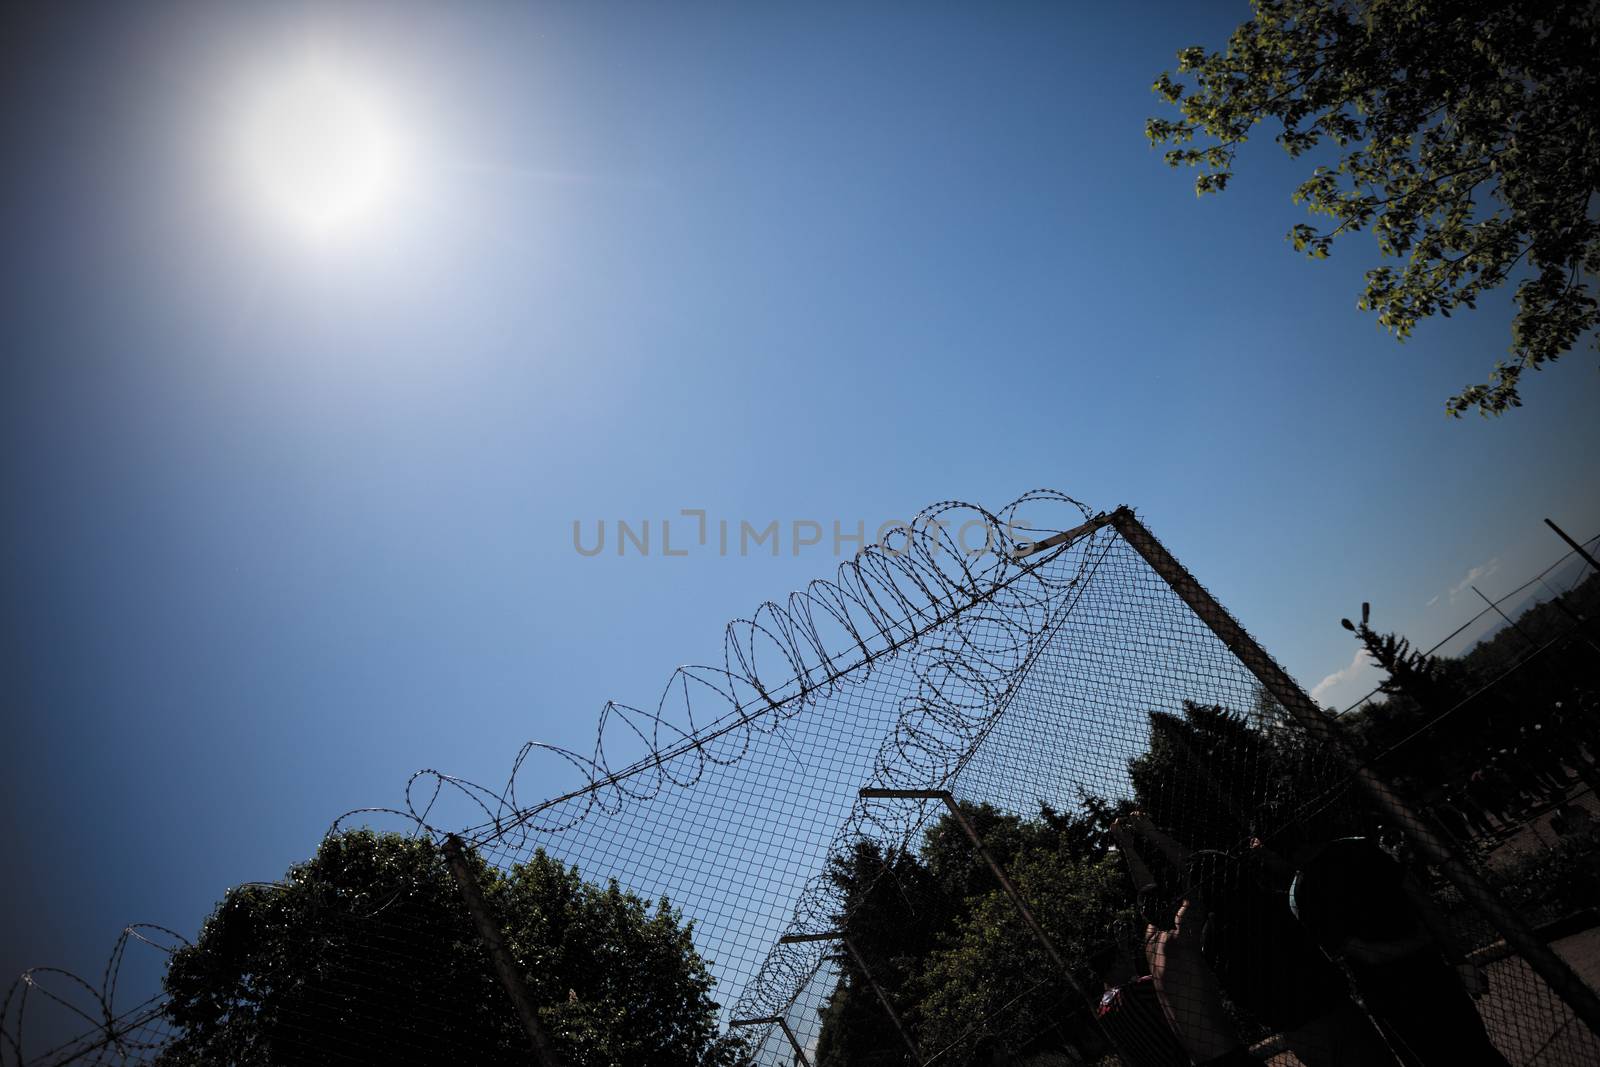 steel wired fence of a prison with skies and sun abeve